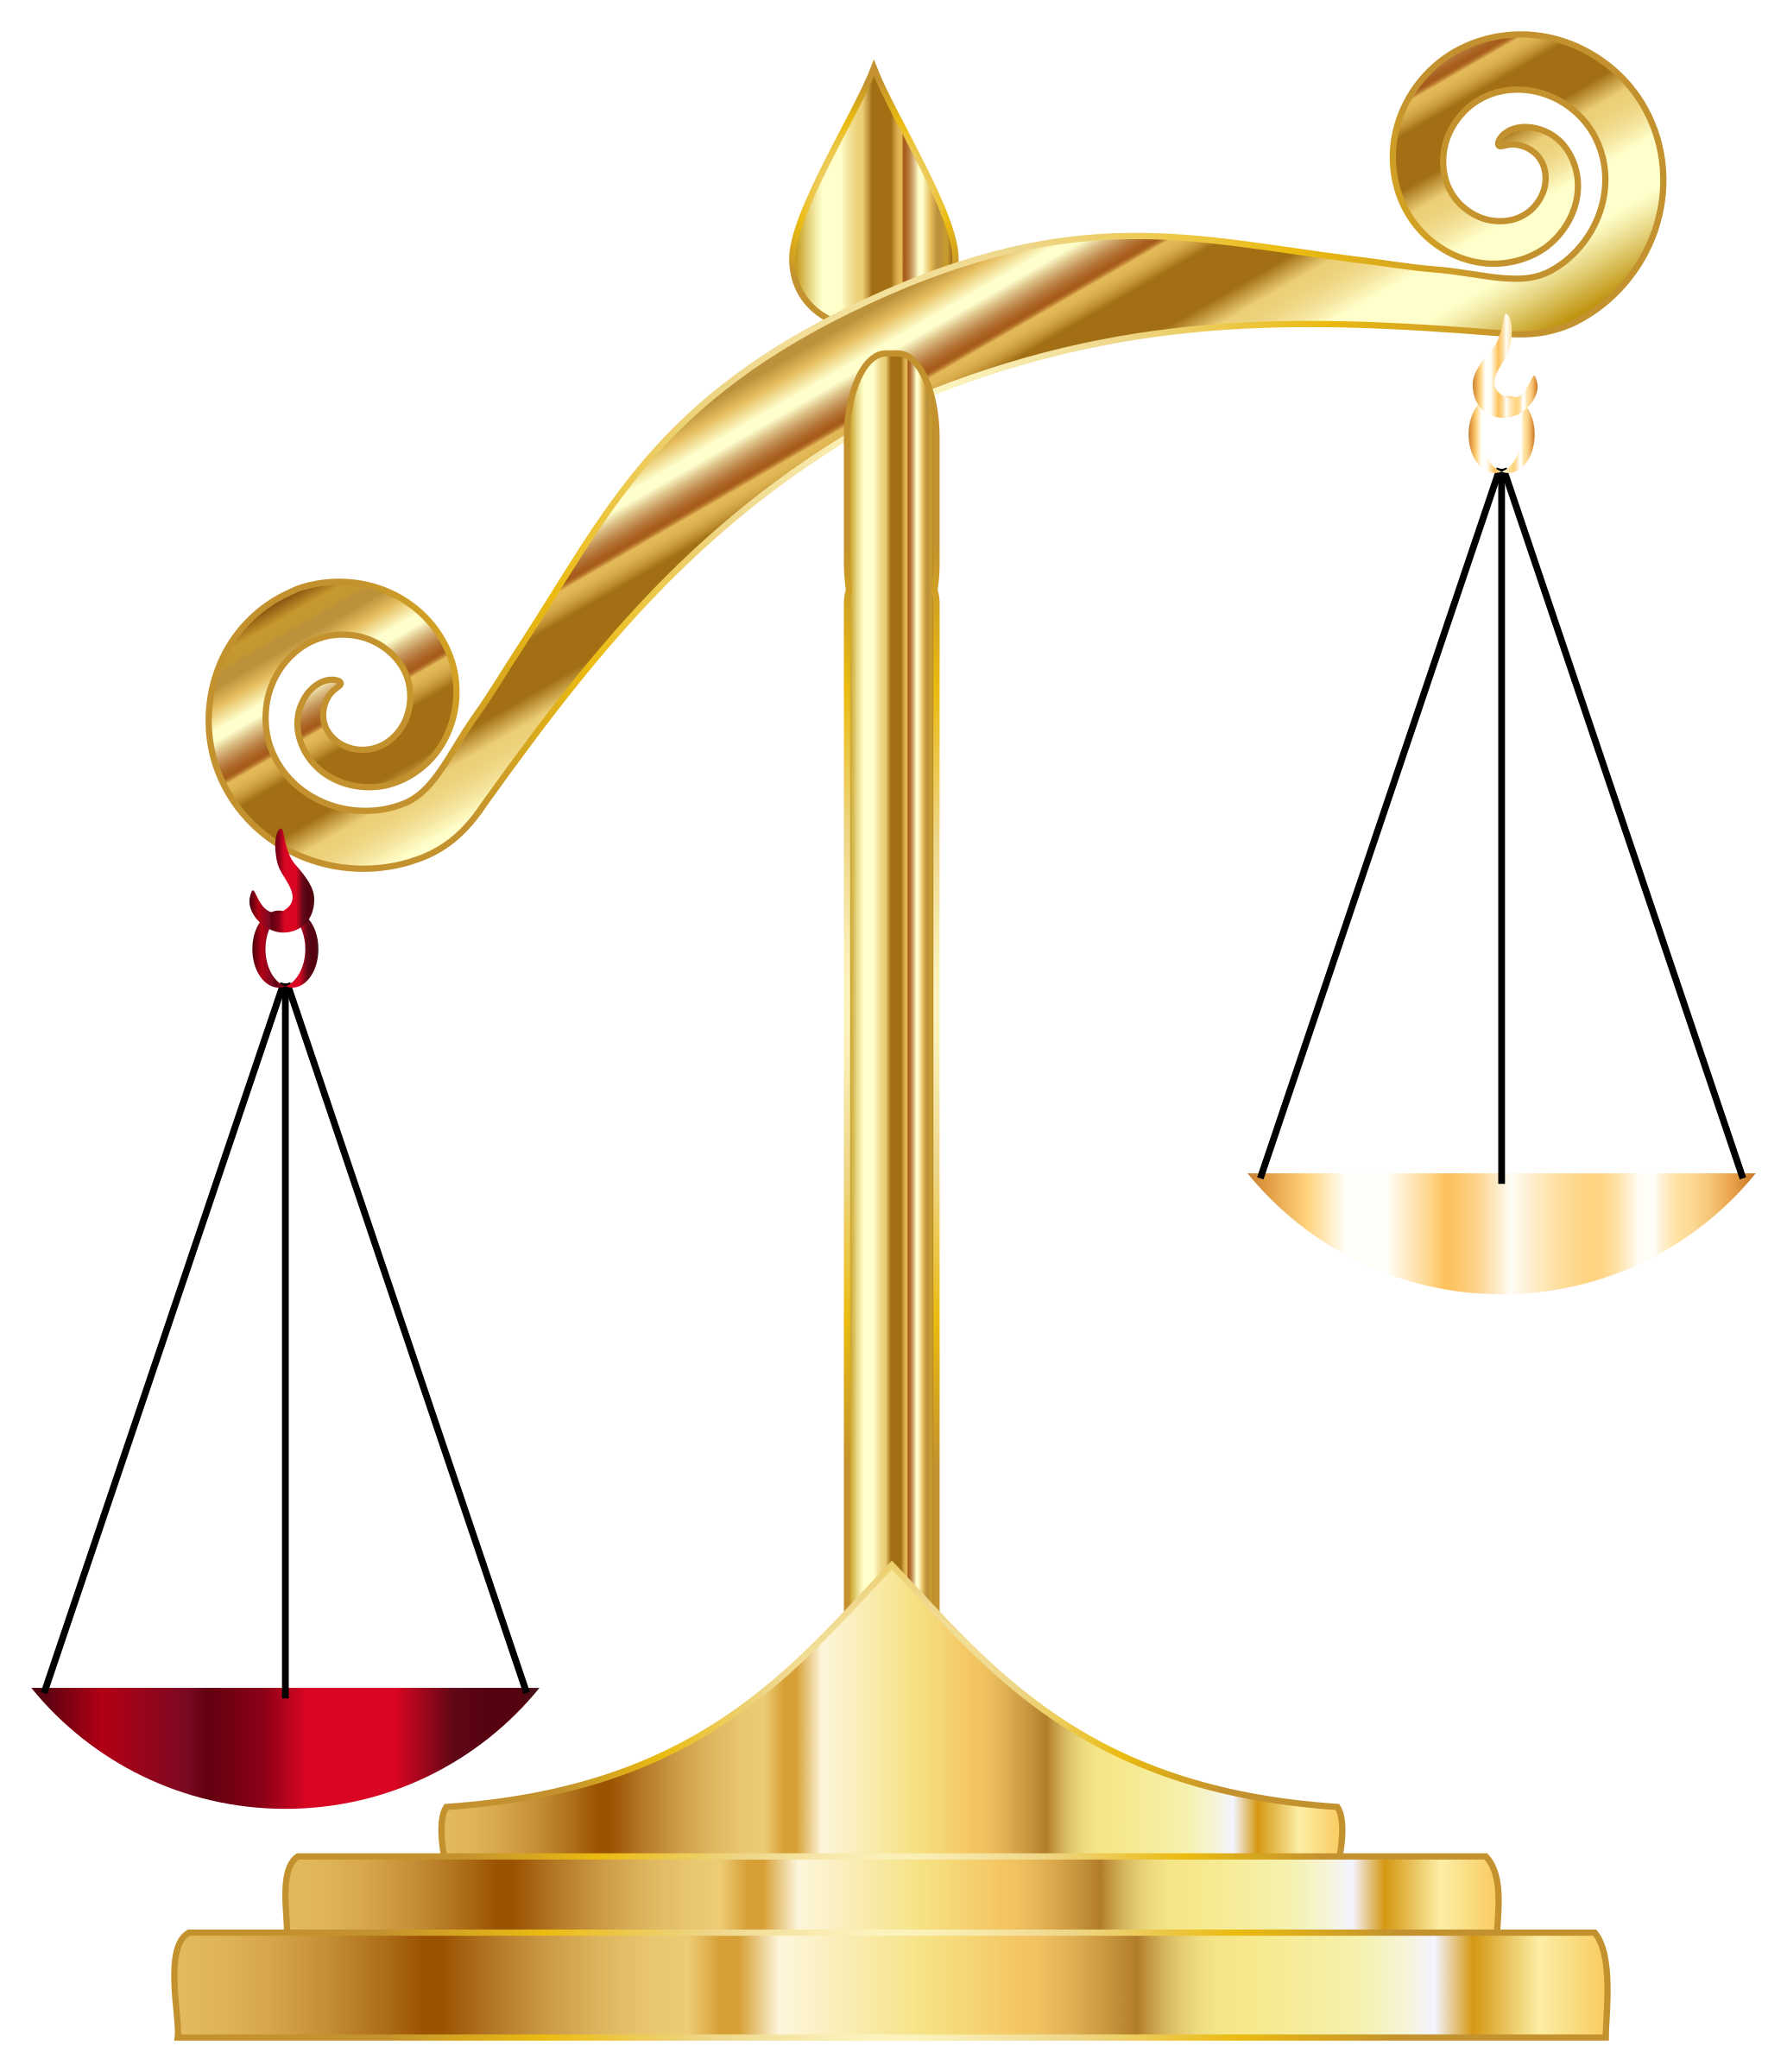 microsoft clip art scales of justice - photo #9